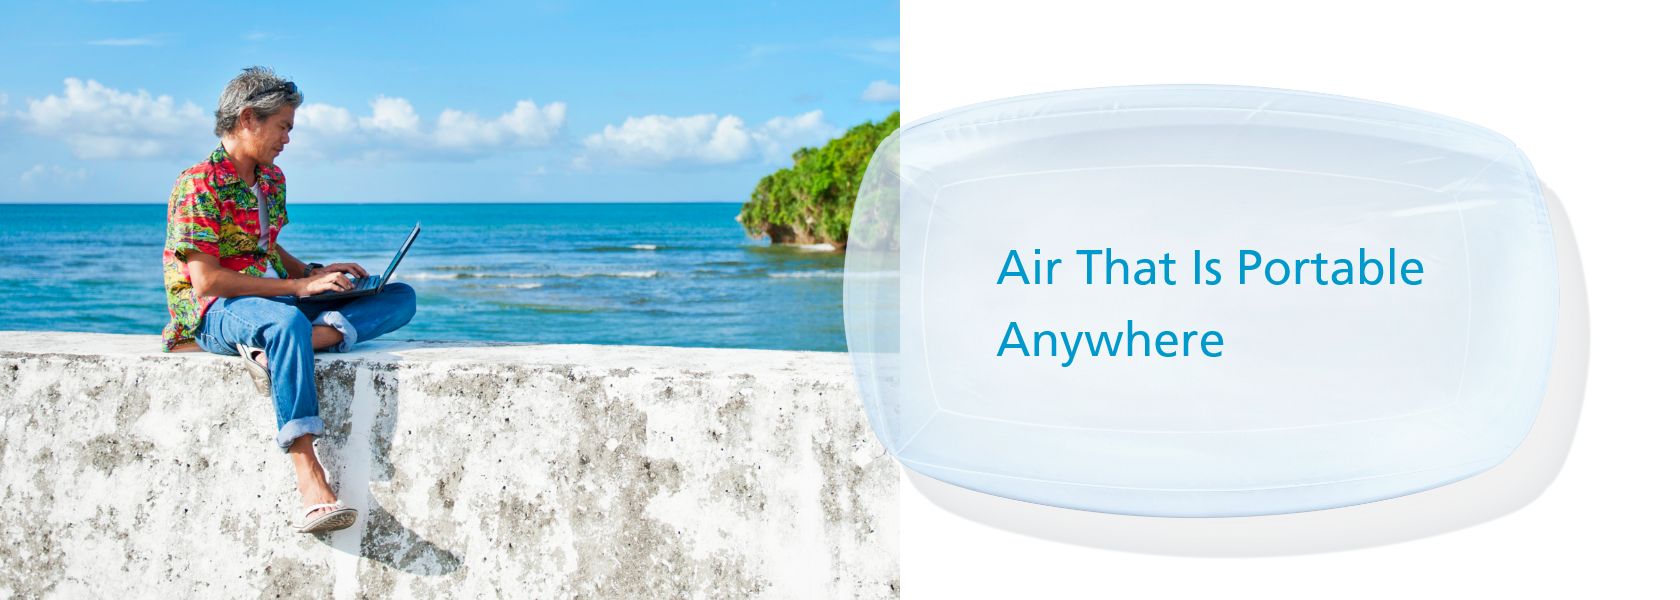 Air That Is Portable Anywhere